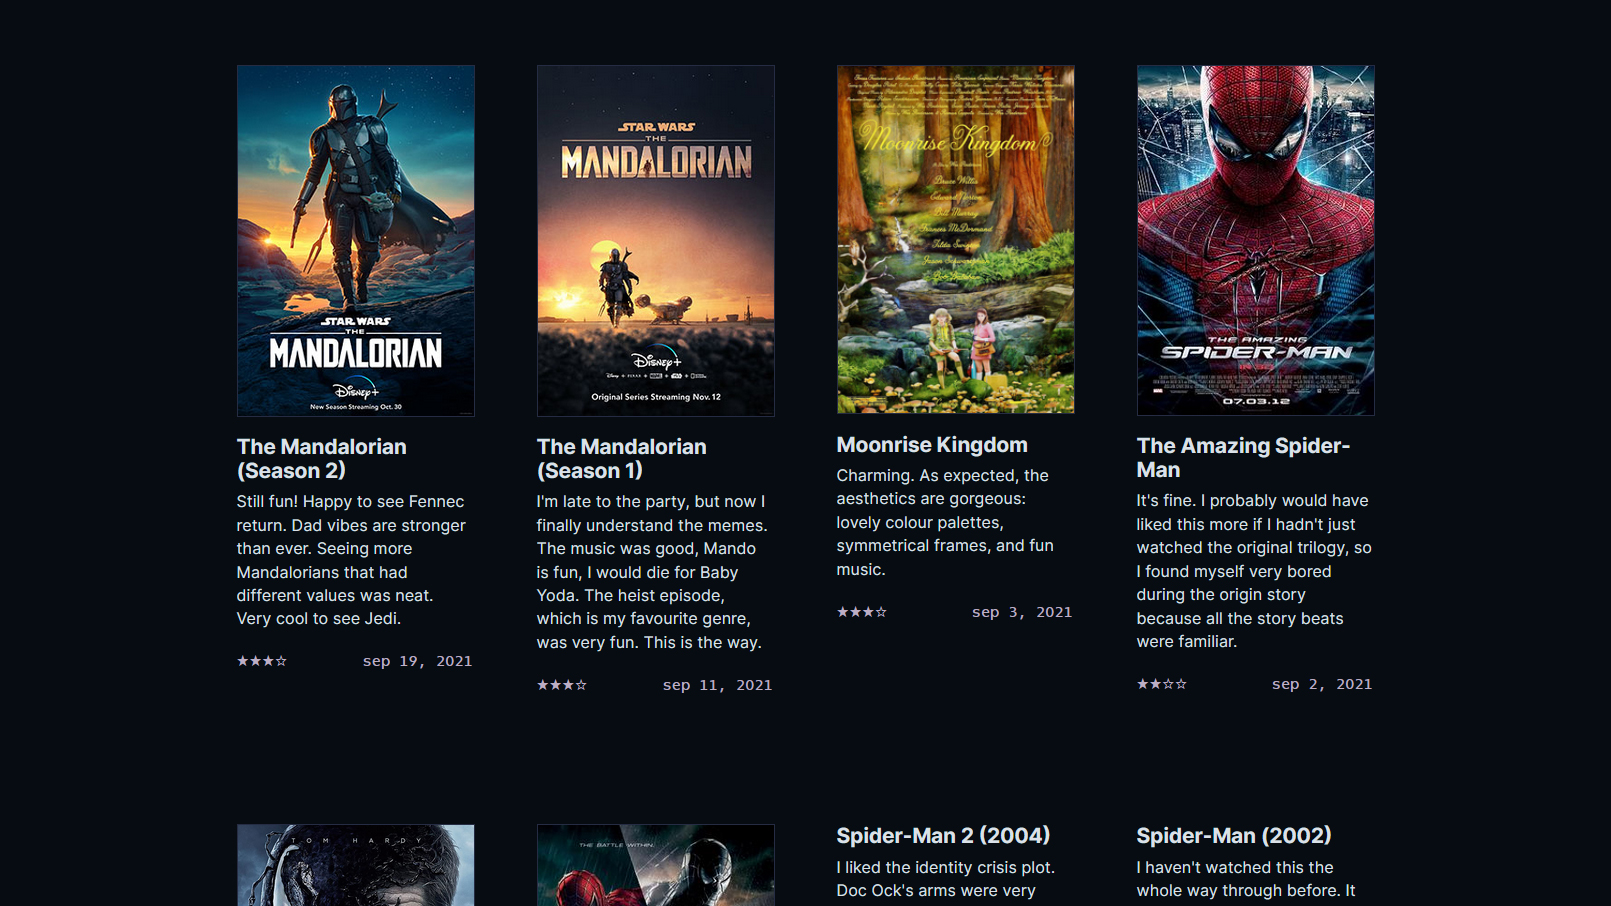 Movie posters and short reviews, organized in 4 columns.